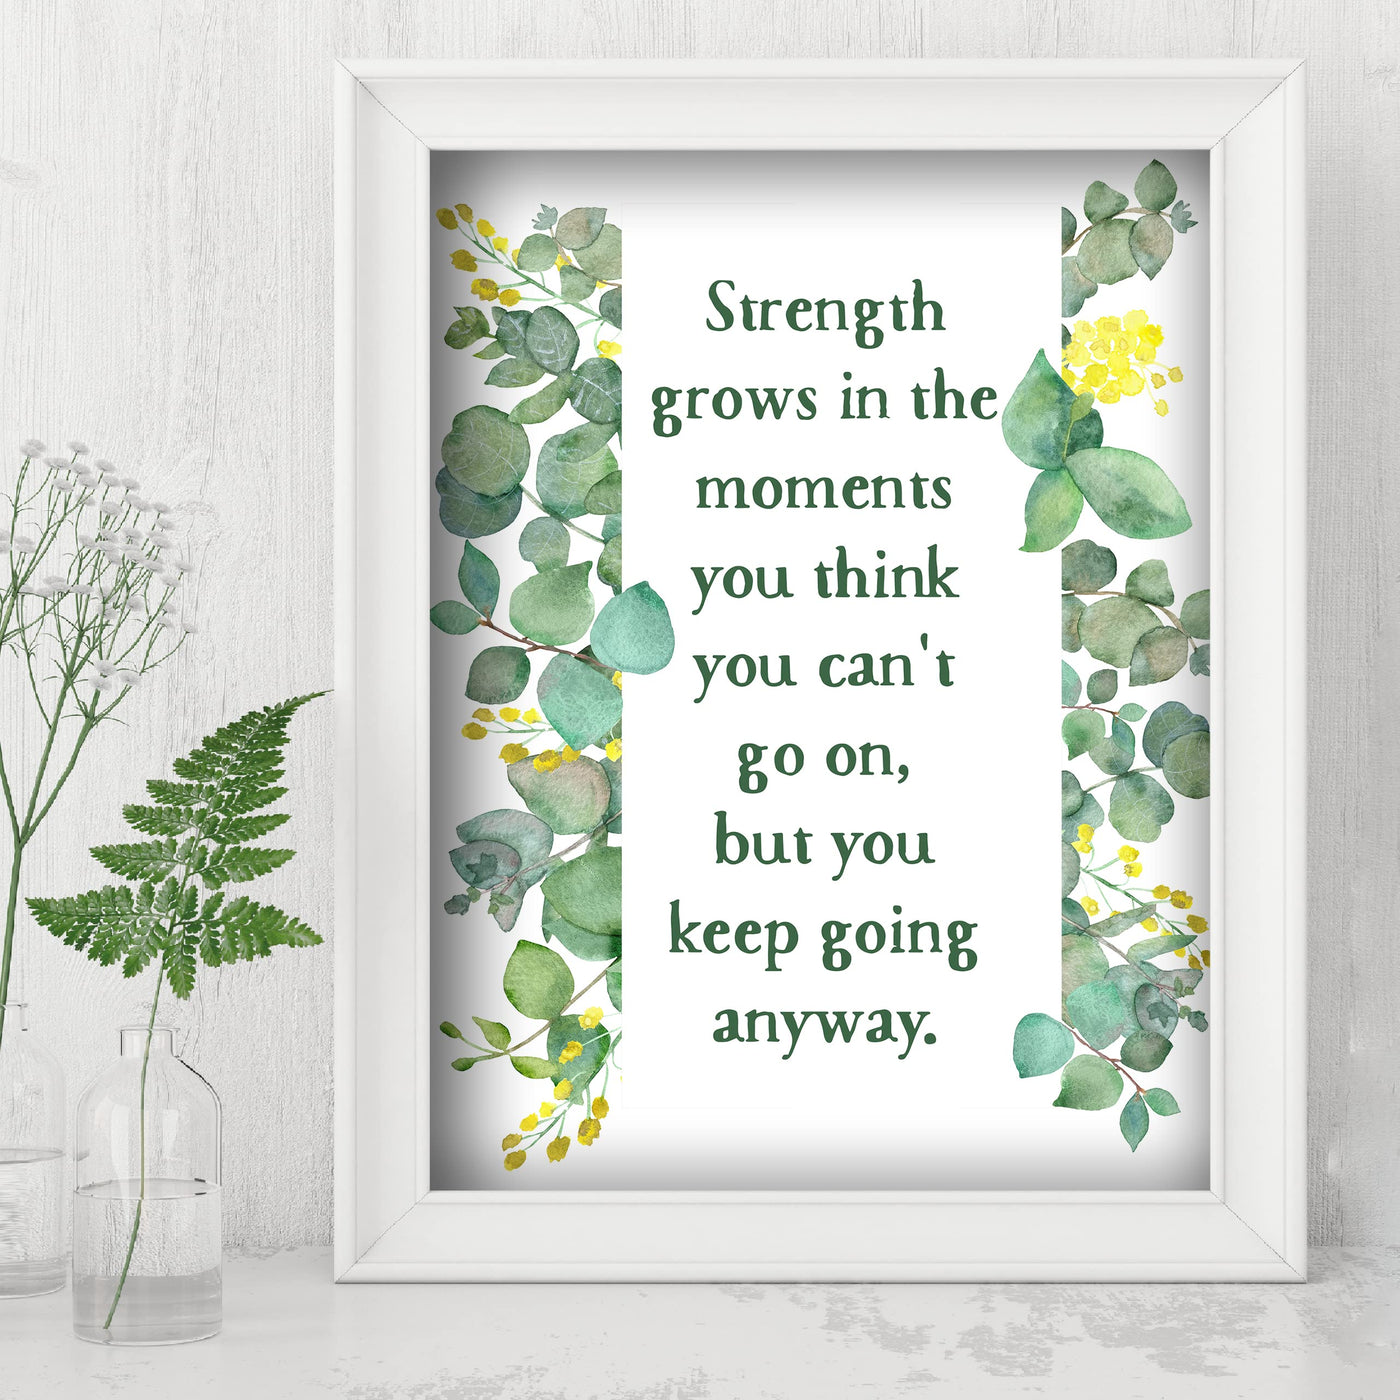 Strength Grows in the Moments You Think Can't Go On Inspirational Wall Art -8 x 10" Floral Picture Print -Ready to Frame. Positive Quotes for Home-Office-Studio-School Decor. Great Gift & Reminder!